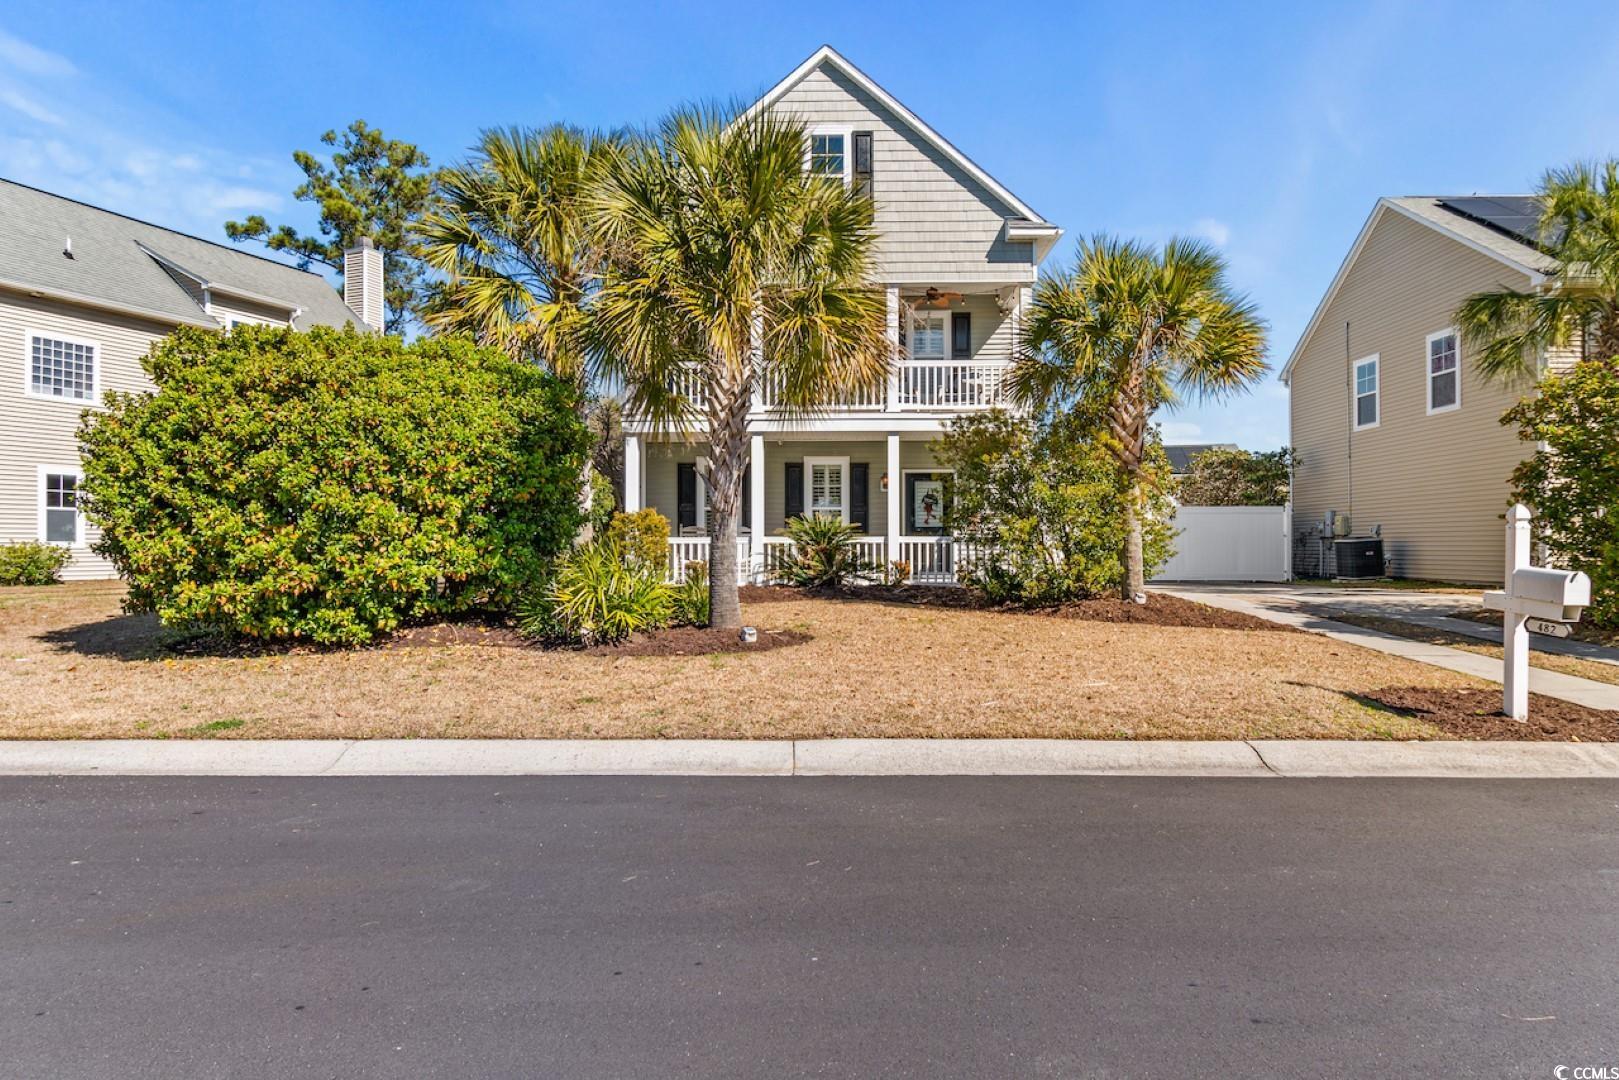 Welcome to 482 Emerson Dr. in beautiful Myrtle Beach! This exquisite property, constructed in 2006, presents a wonderful opportunity for luxurious coastal living. Boasting 2,149 square feet of heated space, this home offers ample room for relaxation and entertainment. Upon arrival, the charm of this residence is immediately apparent with its classic plantation shutters gracing all front windows. Step inside to discover a well-appointed interior featuring a harmonious blend of vinyl plank, tile, and carpet flooring throughout. The heart of the home lies in the stunning kitchen, equipped with Corian countertops, stainless steel appliances, a stylish backsplash, and a convenient pantry. Adjacent to the kitchen is a formal dining area adorned with built-in cabinetry, perfect for hosting elegant dinner parties or casual family gatherings.  Upstairs, the second floor is highlighted by a spacious master suite complete with access to a private porch, providing a serene retreat to enjoy the southern climate. The master bedroom also boasts his and her closets, offering ample storage space for your wardrobe. Ascend to the third floor to discover a versatile space with a full bathroom, perfect for use as a flex space or additional bedroom, providing endless possibilities to suit your lifestyle needs. Outside, the property offers a plethora of amenities designed to enhance outdoor living. A swinging 24-foot farm gate welcomes you home, while a detached garage provides parking convenience. A privacy fence surrounds the property, creating a peaceful oasis amidst mature landscaping. Relax and unwind on the back deck, or take a short 15-minute drive to the beach for a day of sun, sand, and surf. Conveniently located near the new Publix shopping center in Carolina Forest, this home offers easy access to a variety of shopping, dining, and entertainment options. Whether you're seeking a tranquil retreat or a vibrant coastal lifestyle, 482 Emerson Dr. offers the perfect blend of comfort, convenience, and elegance. Don't miss your chance to make this your Myrtle Beach sanctuary – schedule your showing today! Square footage is approximate and not guaranteed. Buyer responsible for verification.